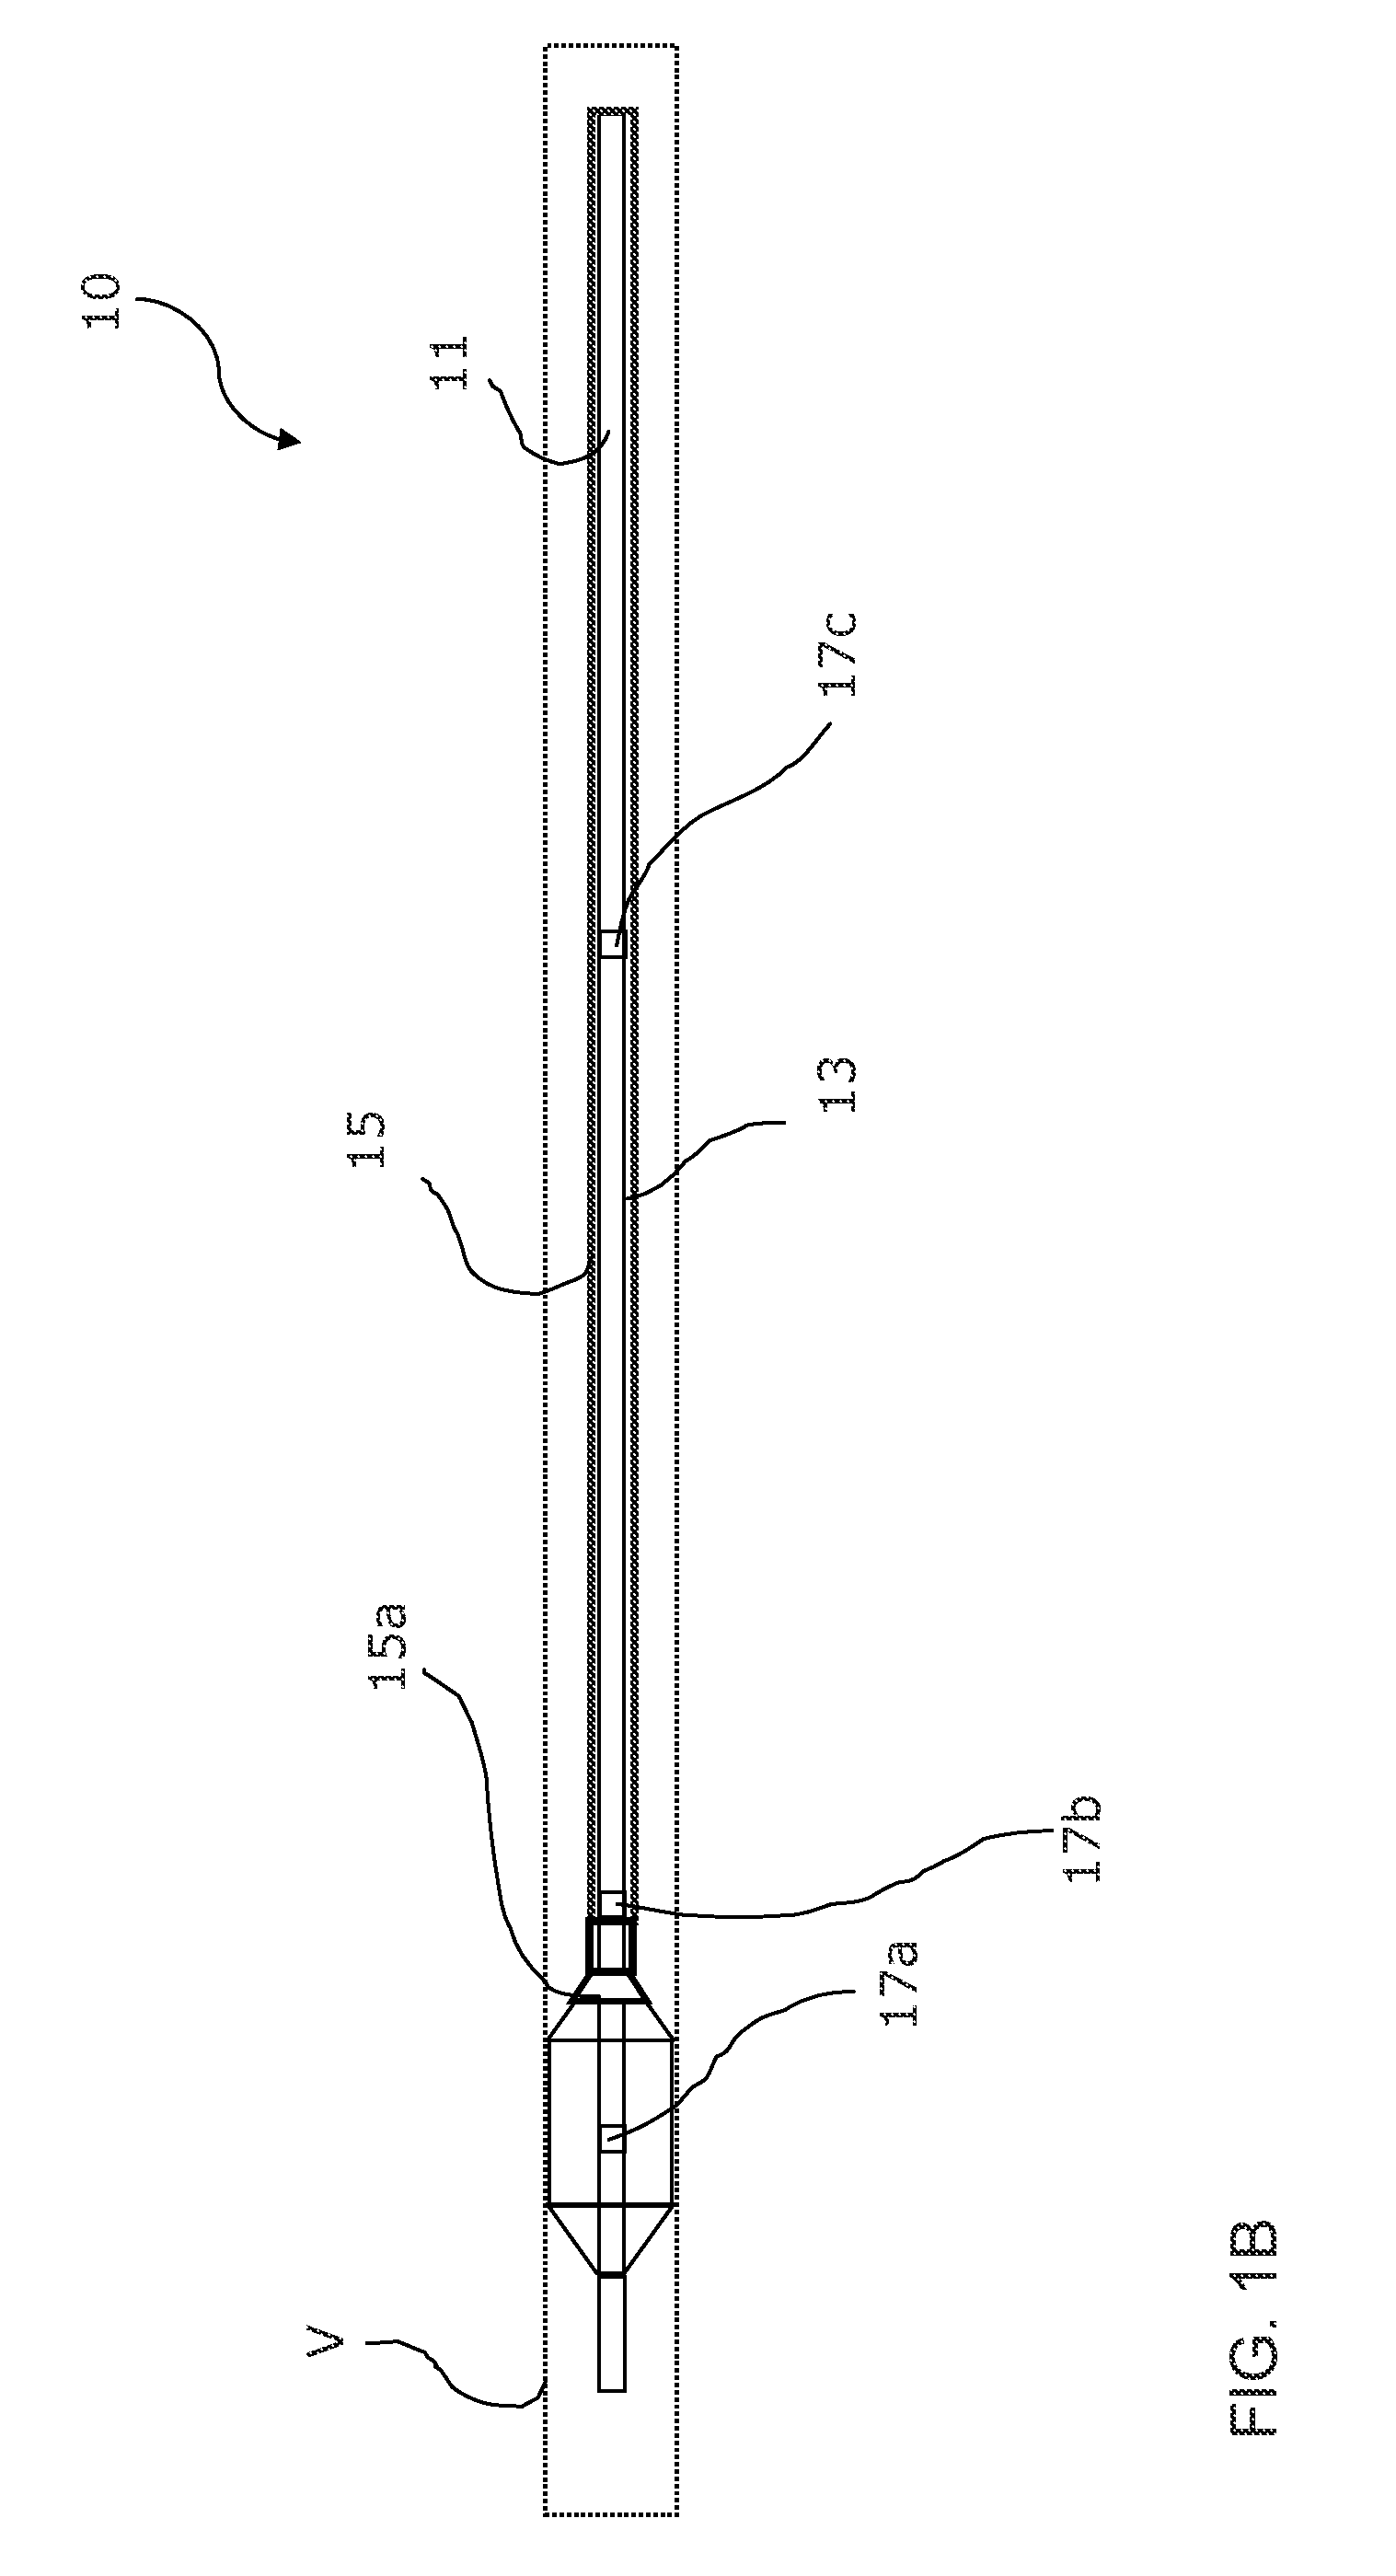 Balloon catheter with uncoated balloon portion or second uncoated balloon